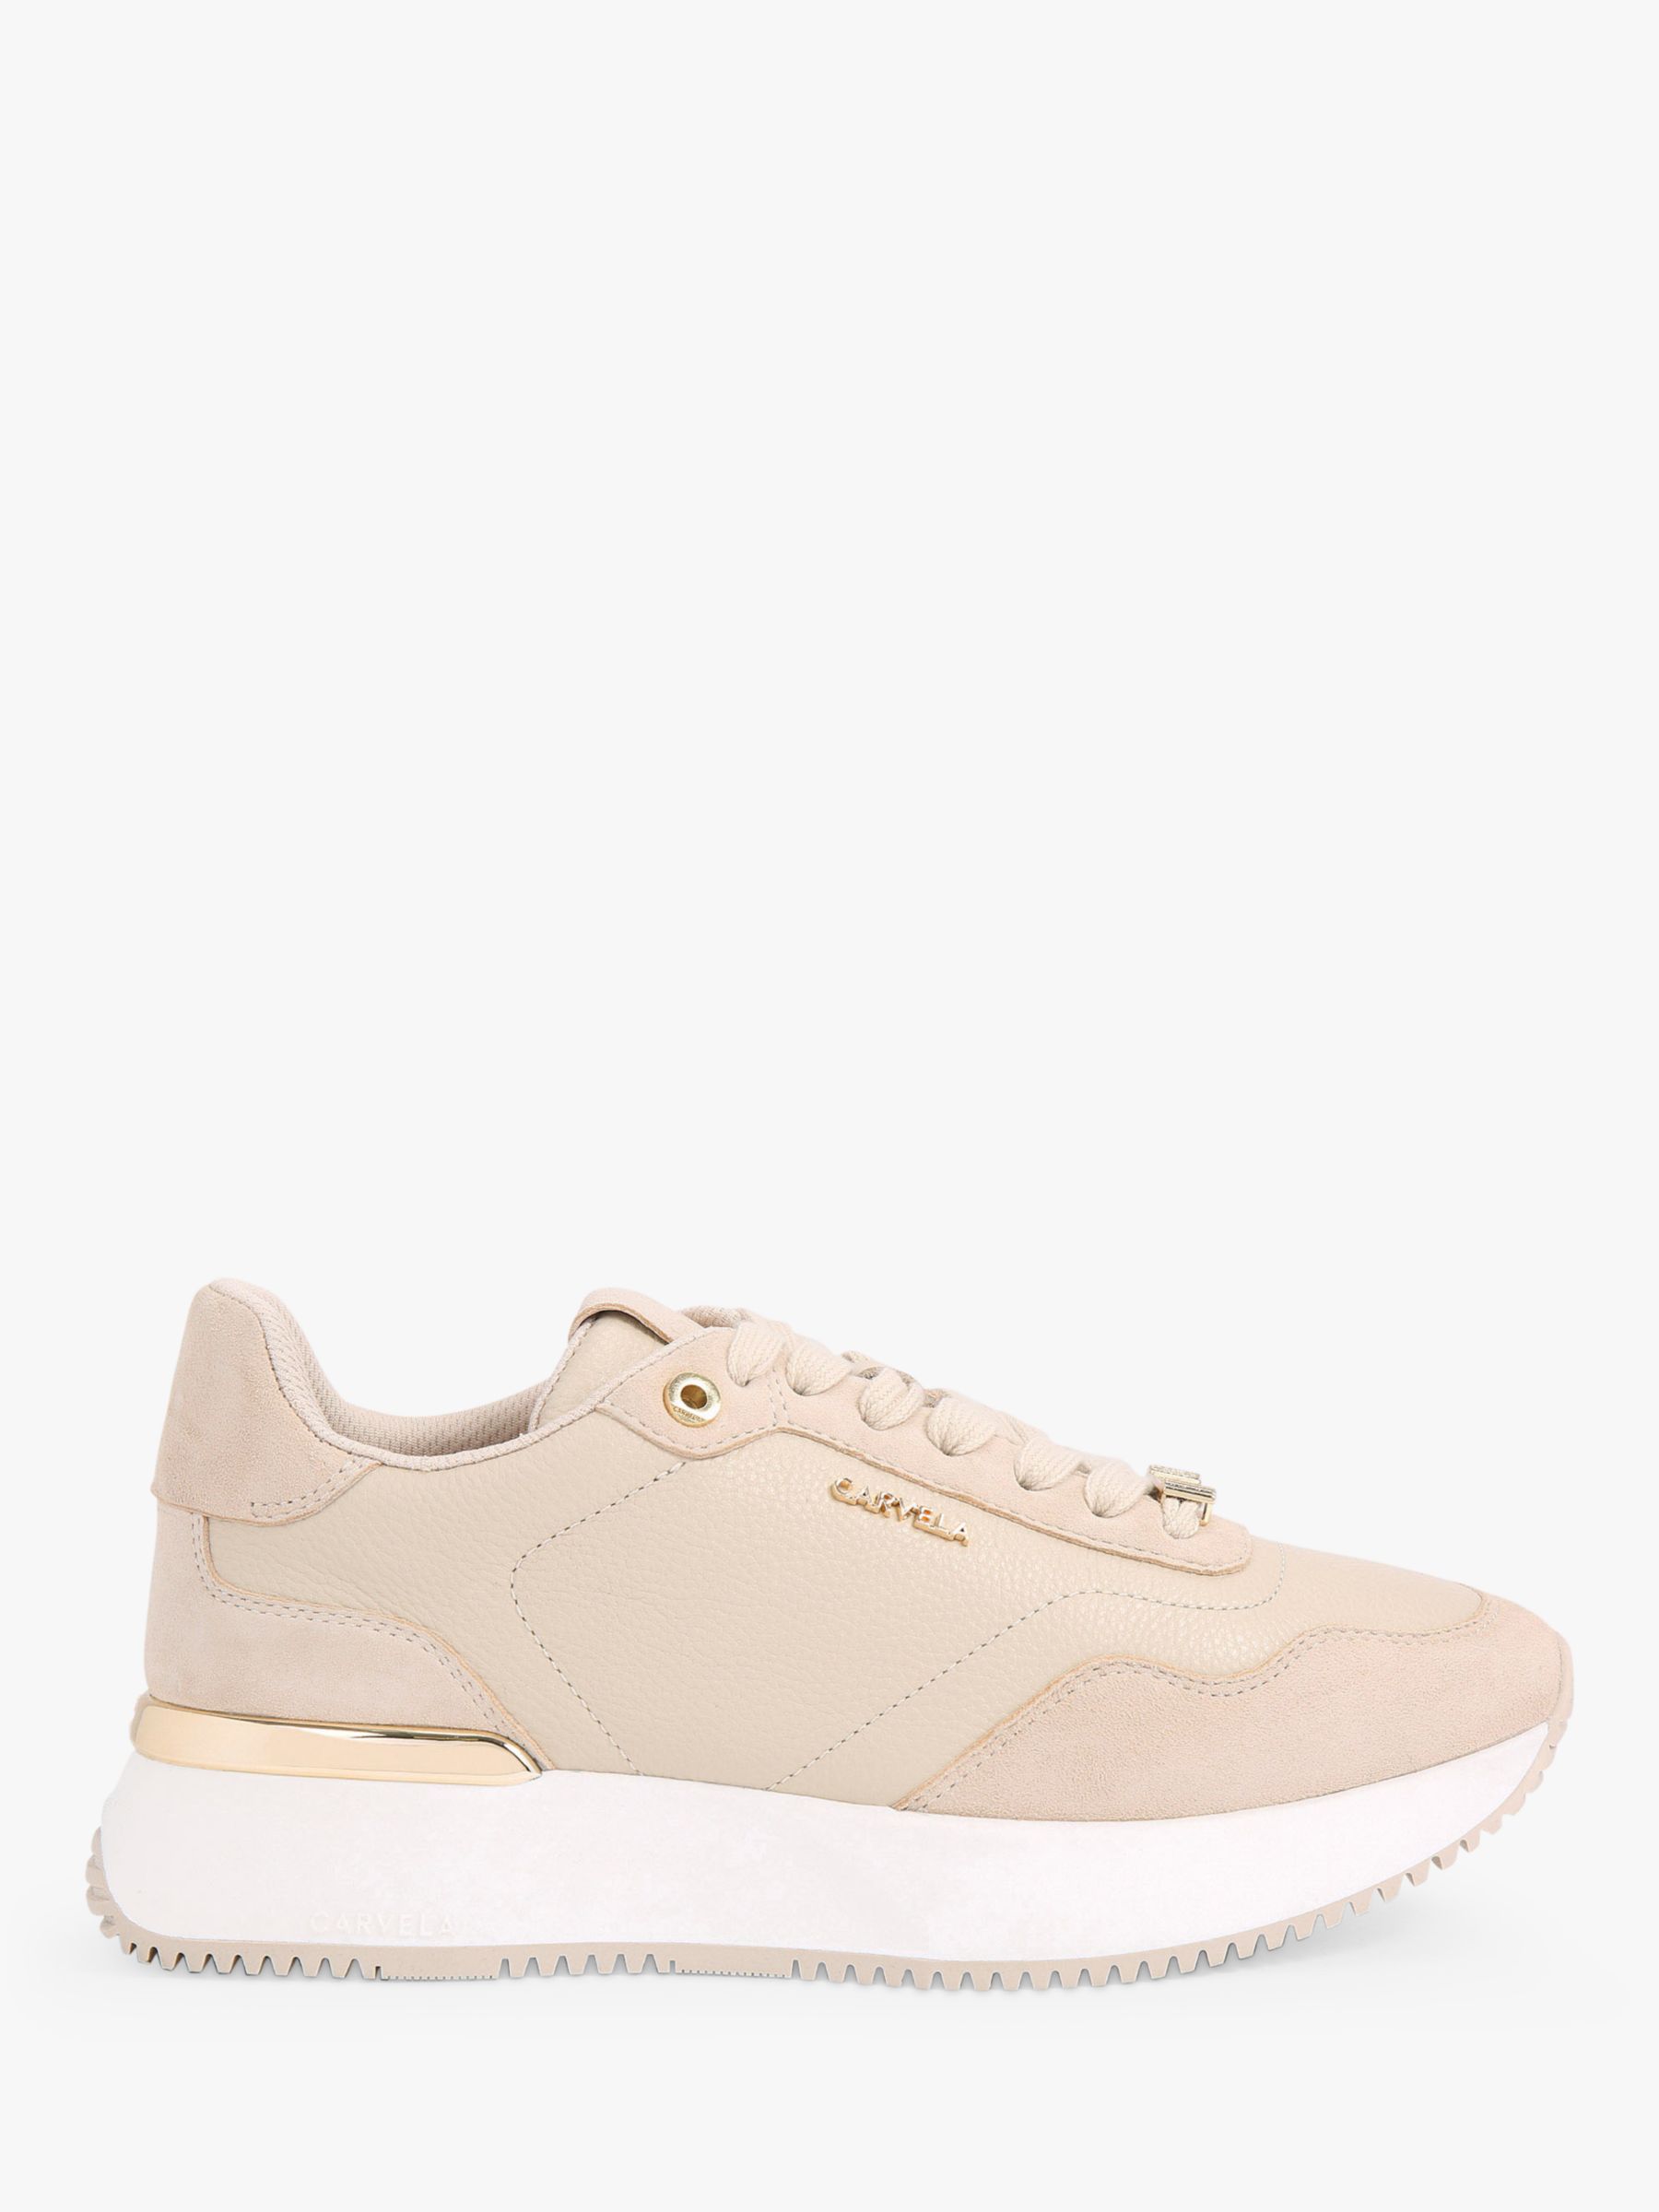 Carvela Flare Leather Trainers, Natural Beige at John Lewis & Partners